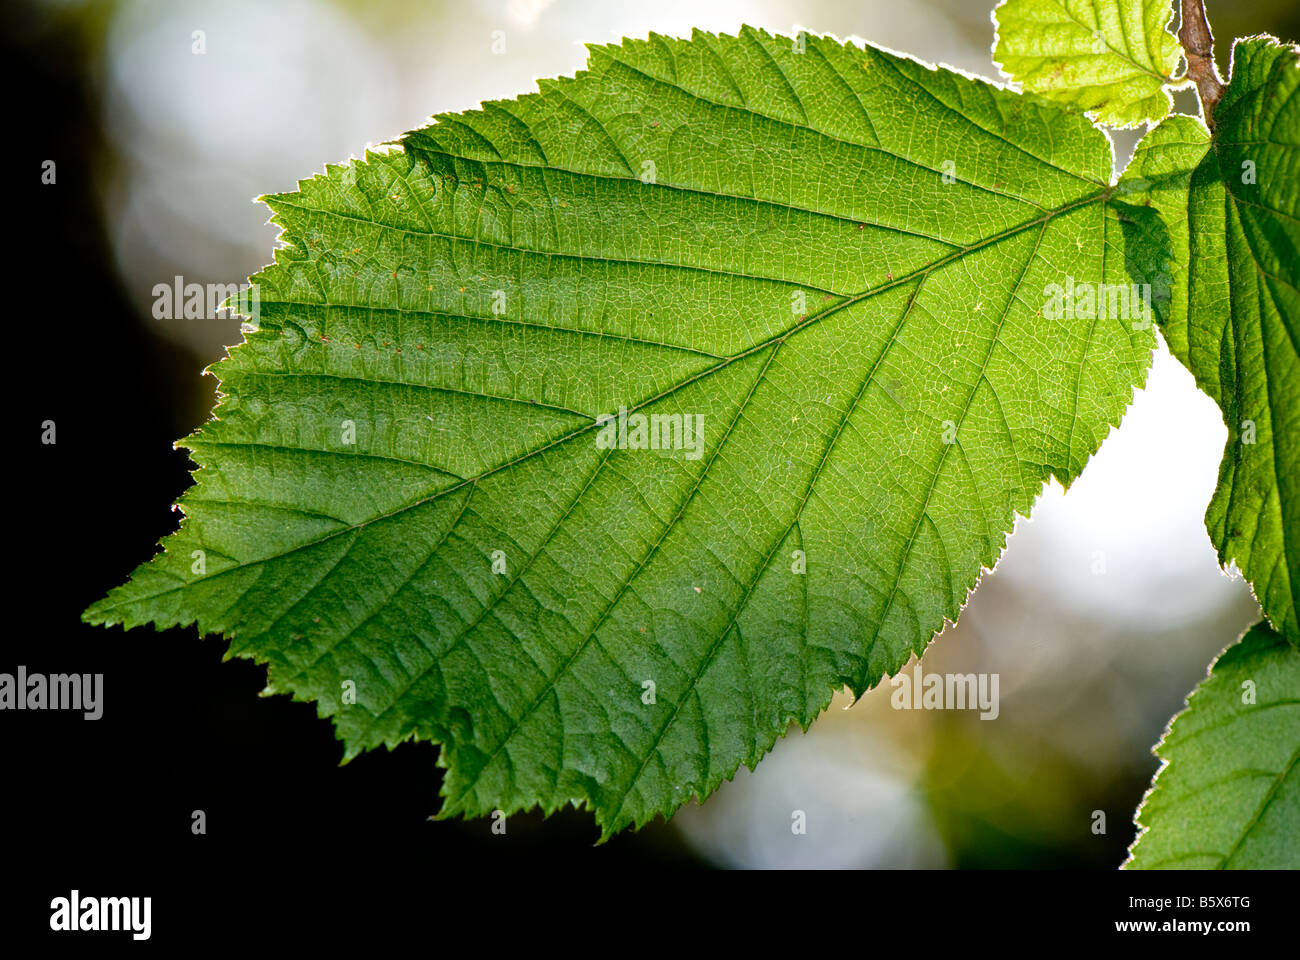 Close-up of a Hazel leaf showing lateral and main veins Stock Photo